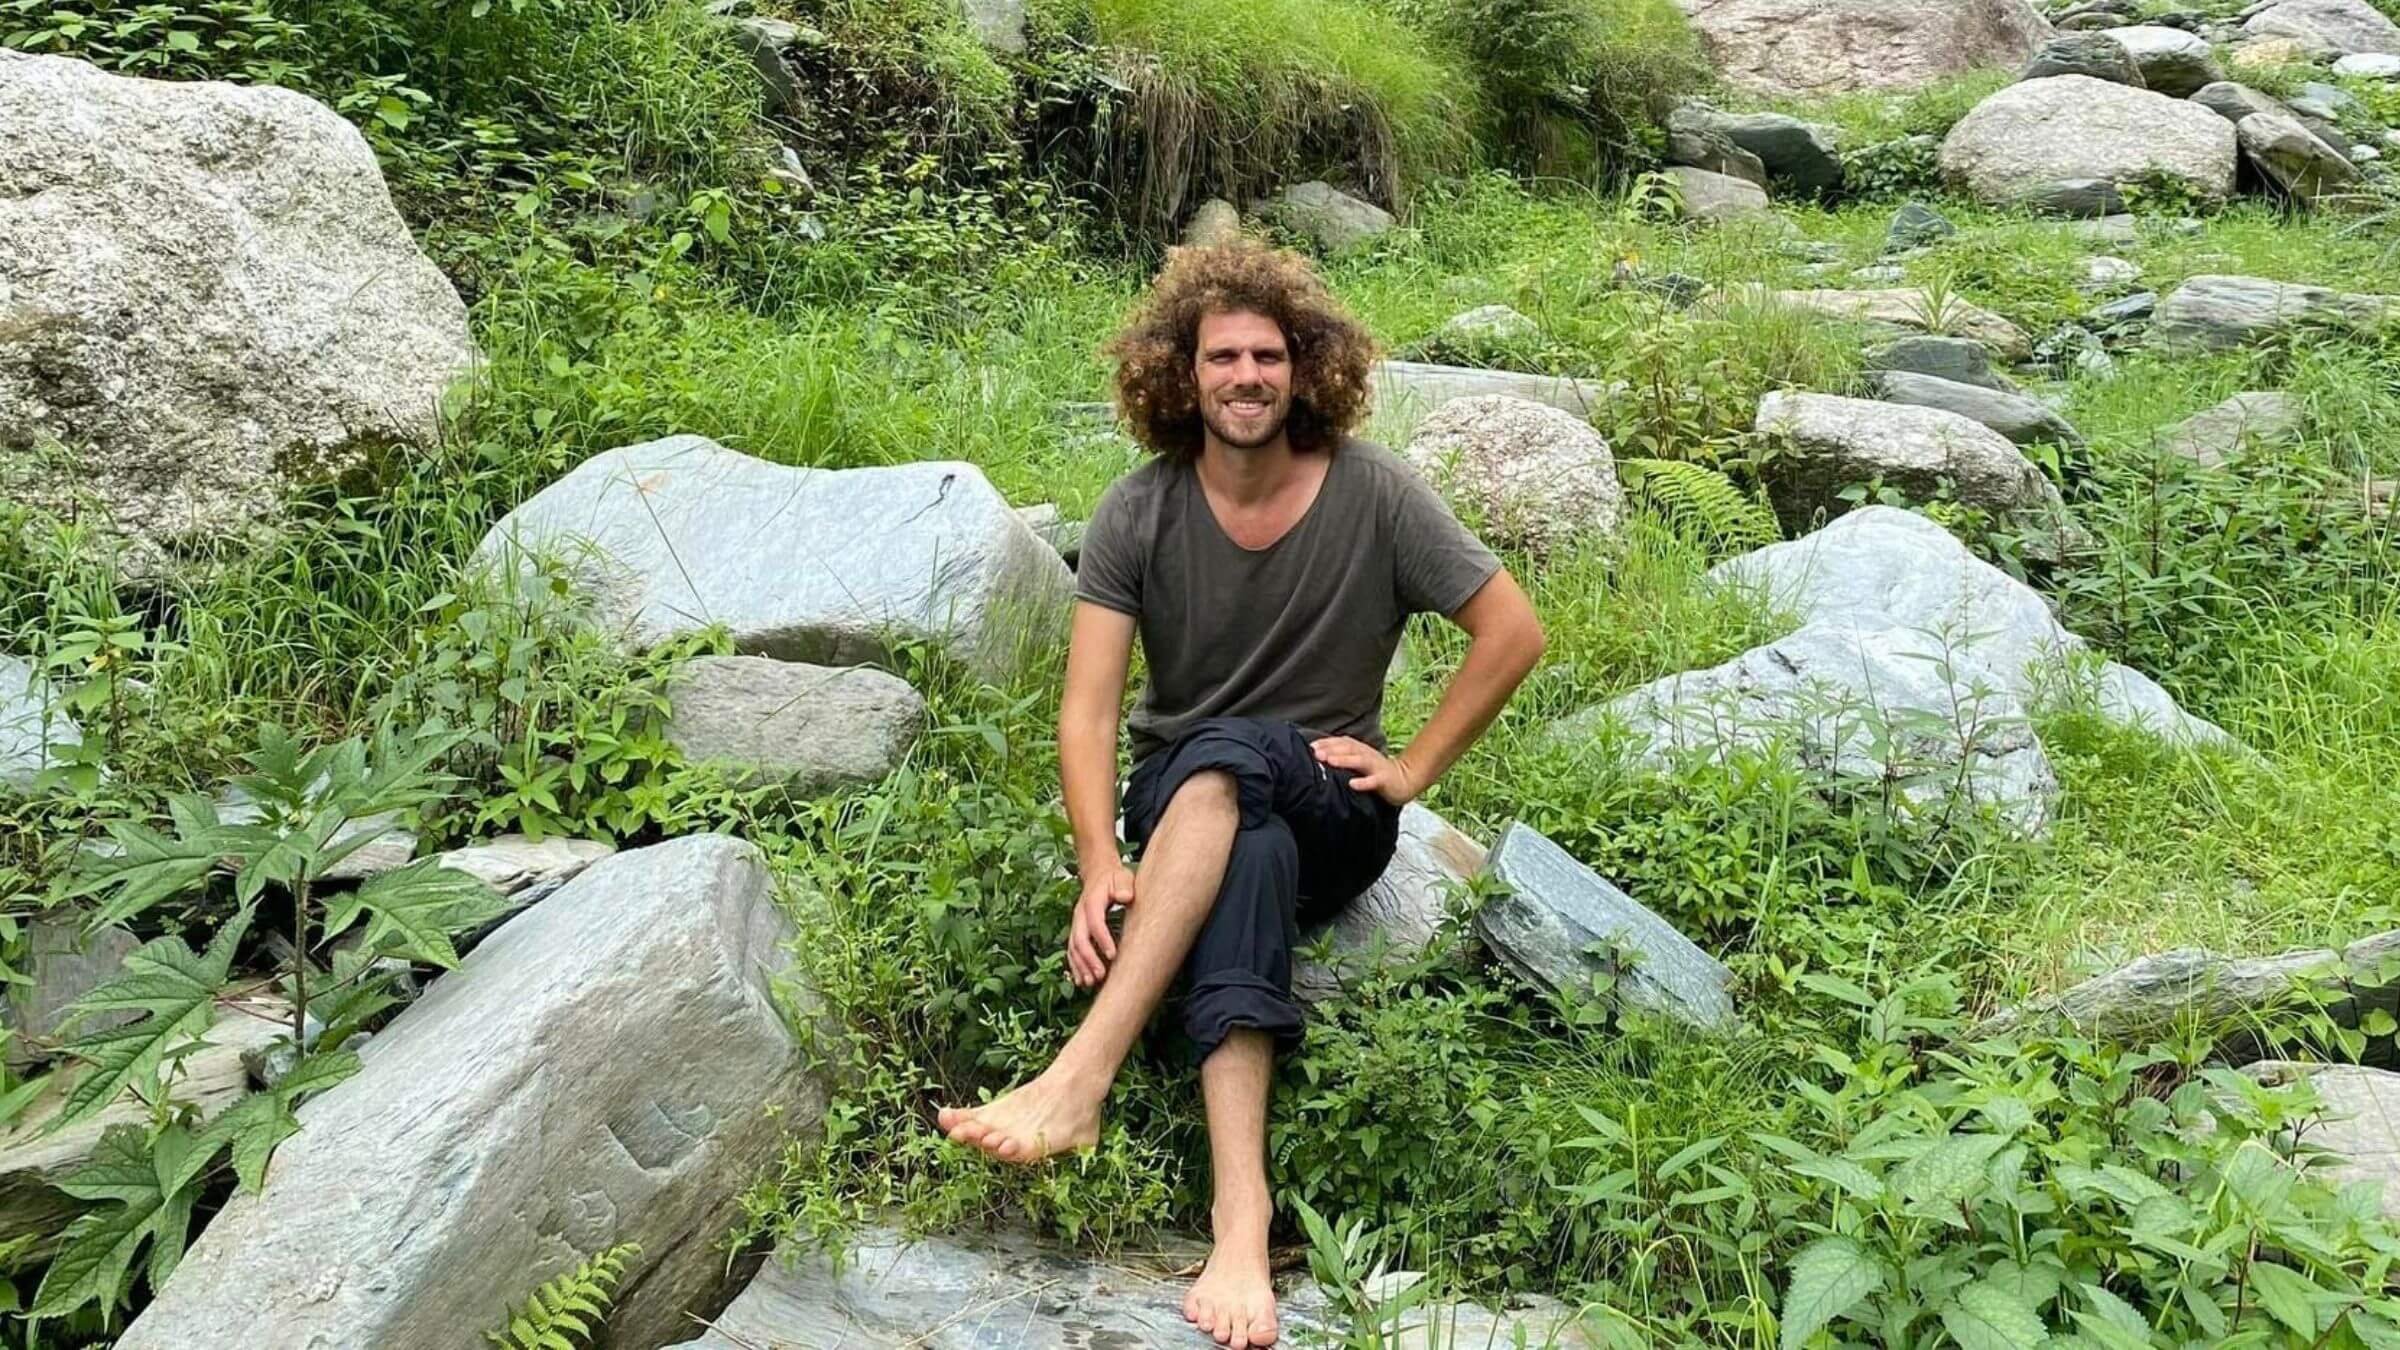 Hayim Katsman, a peace activist with a Ph.D., was murdered by Hamas on Kibbutz Holit. In dying, he saved three lives — a woman whom he shielded, and the two children that she, in turn, later saved.